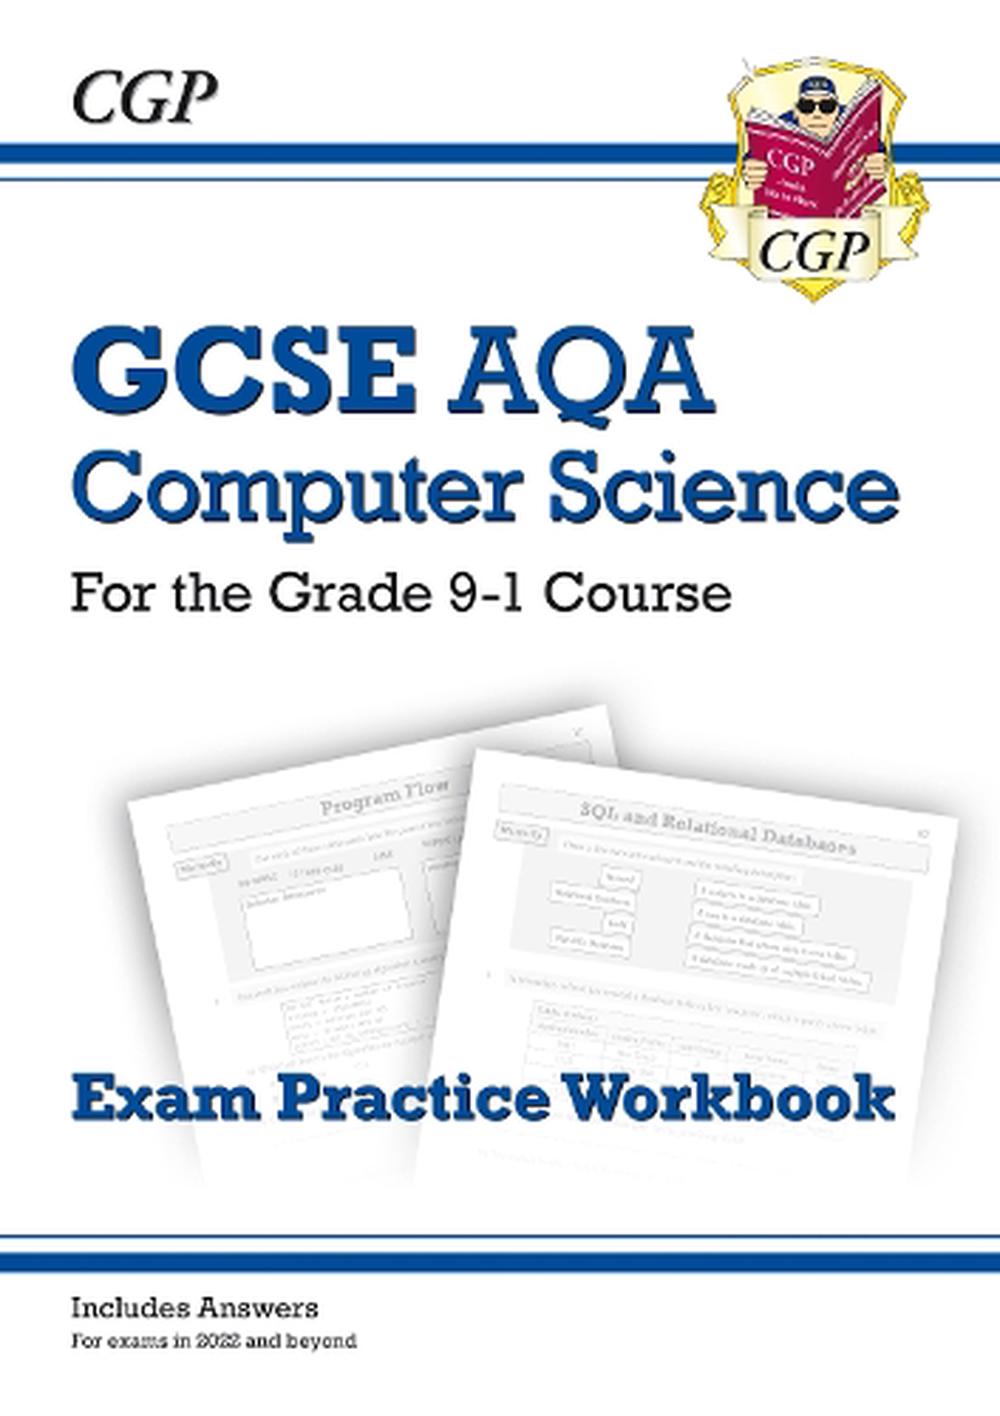 New Gcse Computer Science Aqa Exam Practice Workbook For Exams In 22 And Beyond By Cgp Books Paperback Buy Online At Moby The Great